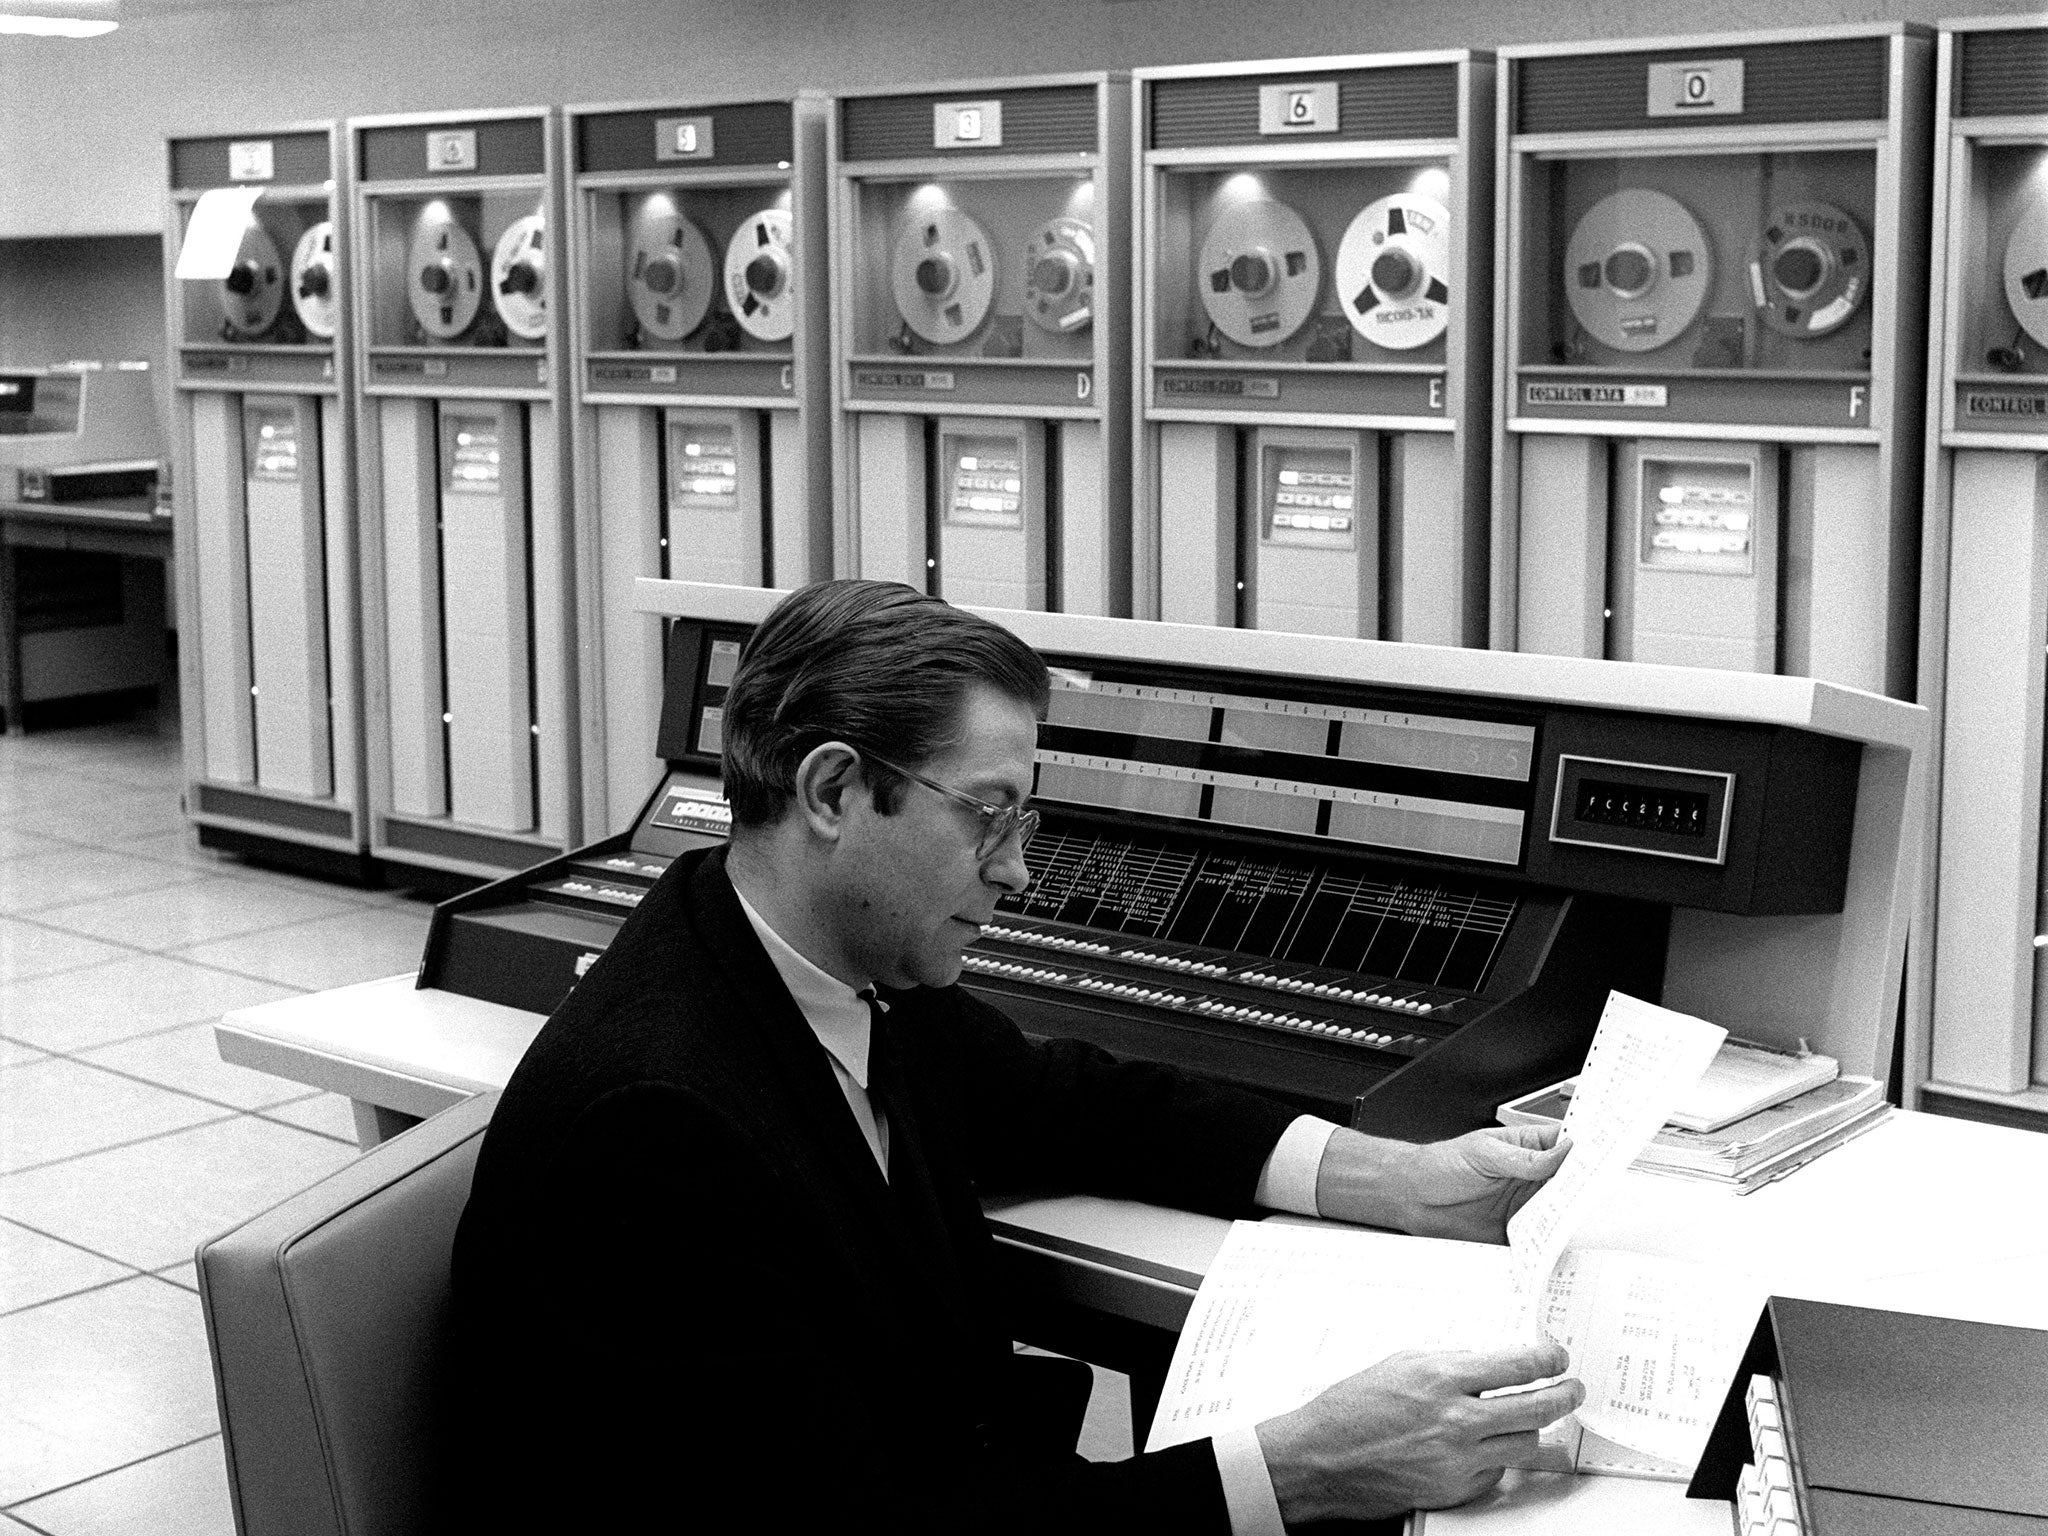 CDC 6600 (1965): Generally regarded as the world’s first successful super-computer, the CDC 6600 was capable of carrying out three million instructions per second and its components filled a large room